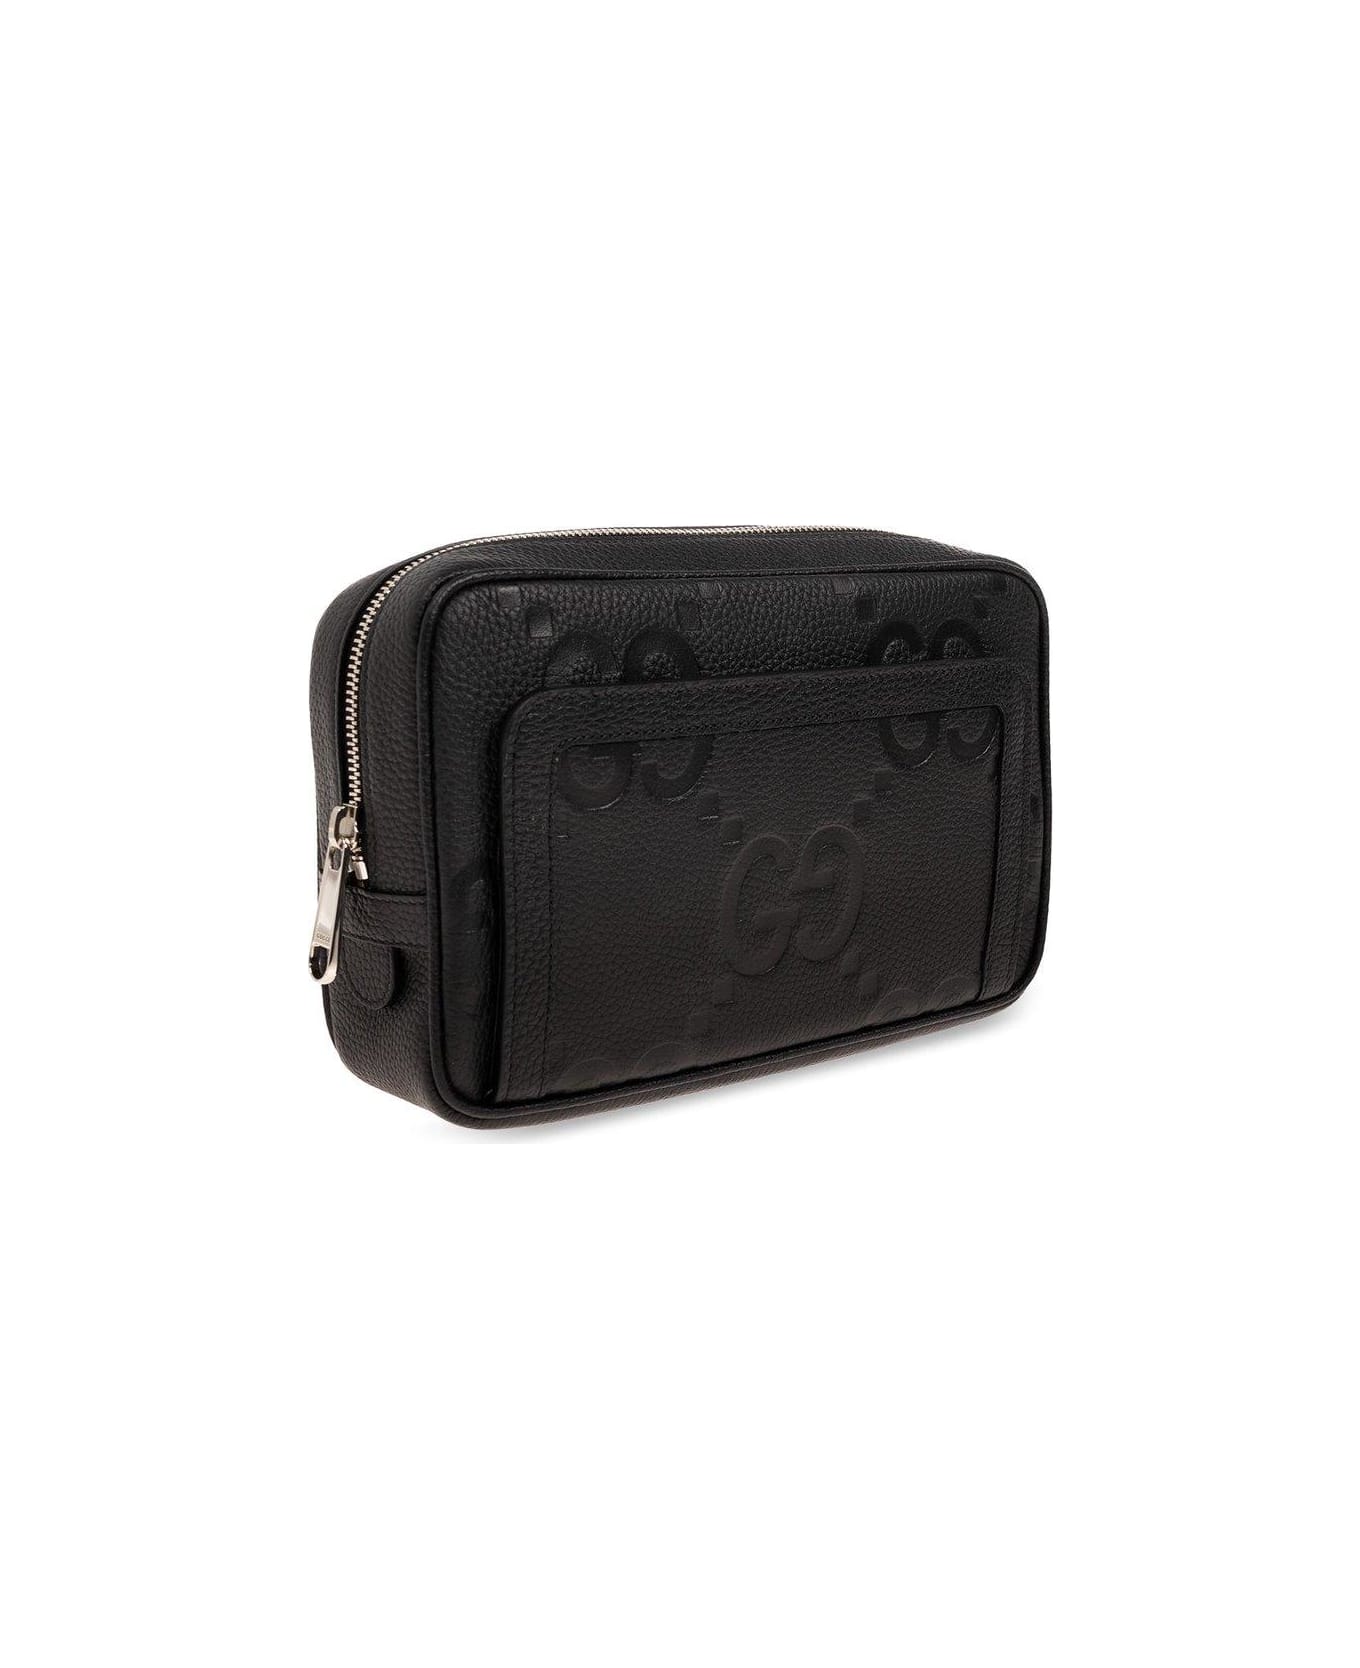 Gucci Jumbo Gg Pouch - Black バッグ